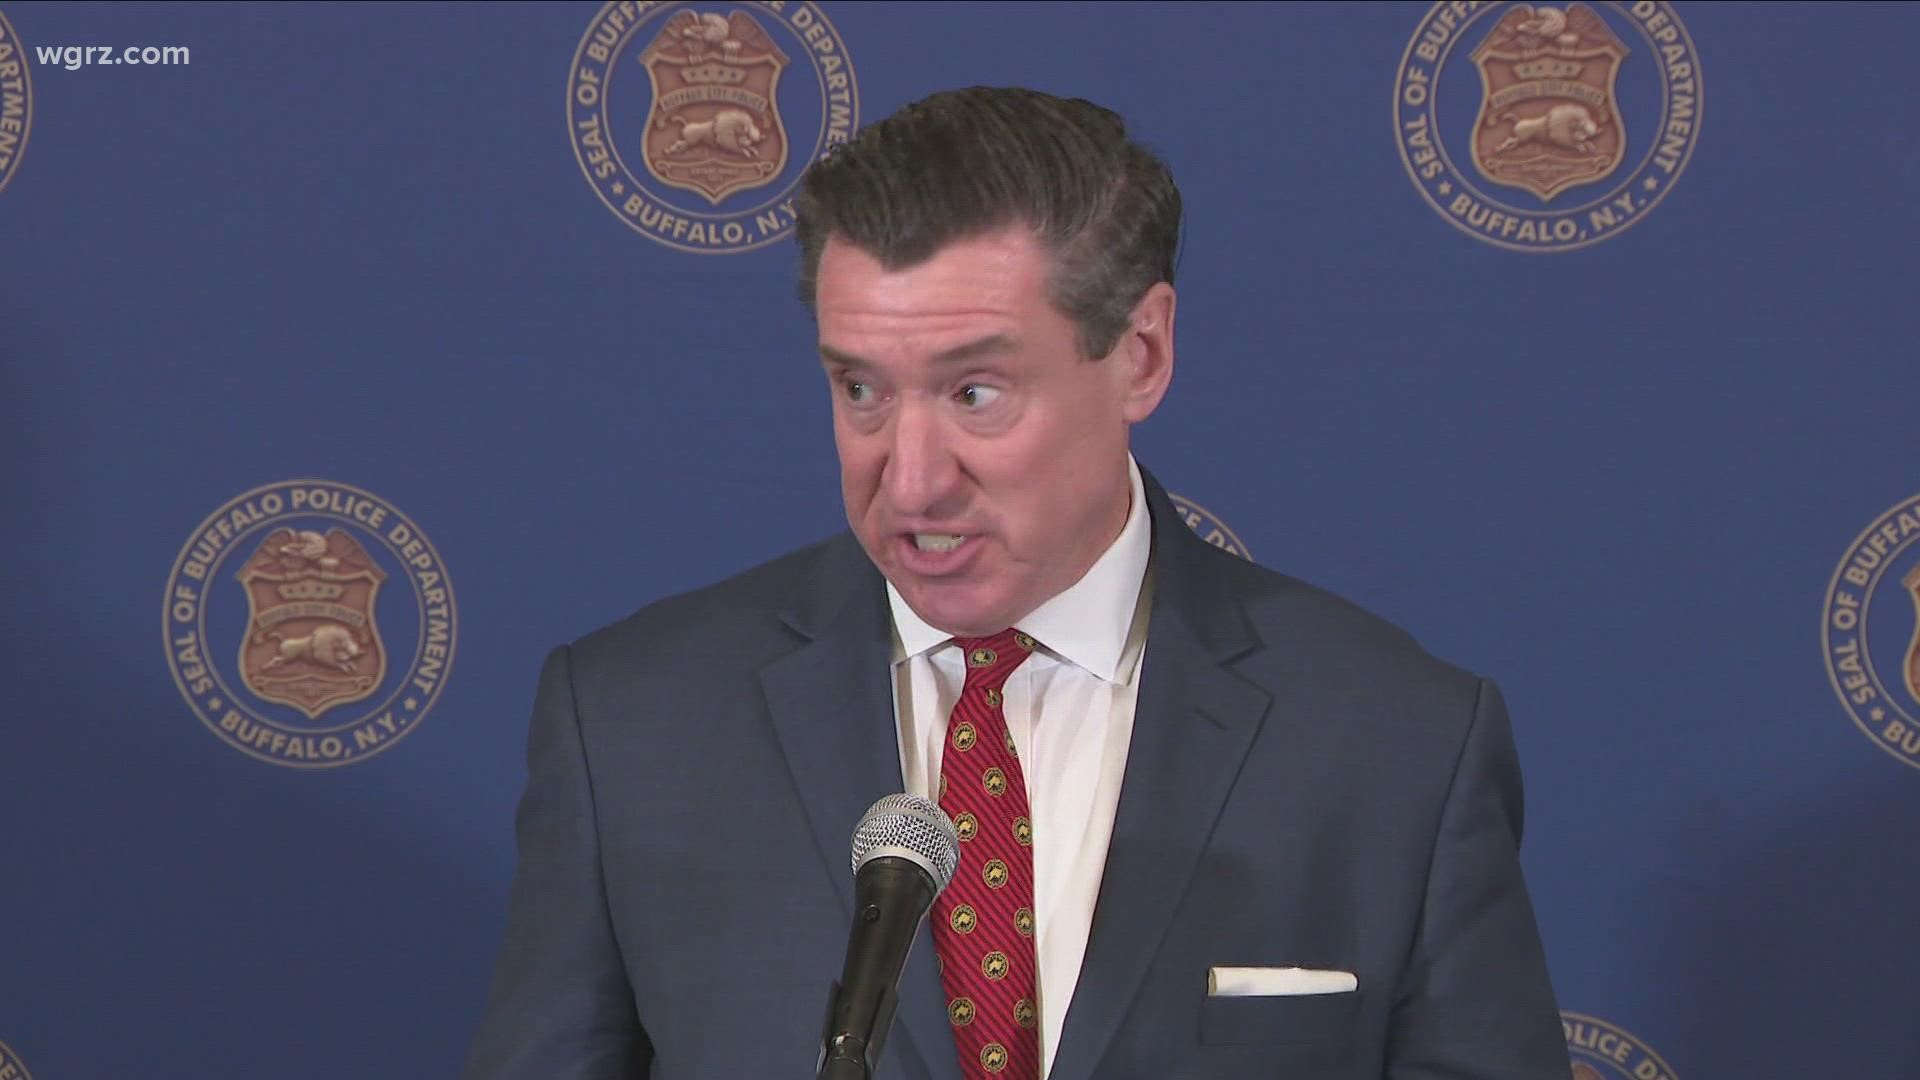 Erie County District Attorney John Flynn went off about the state's raise the age law, which he says is why the teen is charged as an adolescent offender.